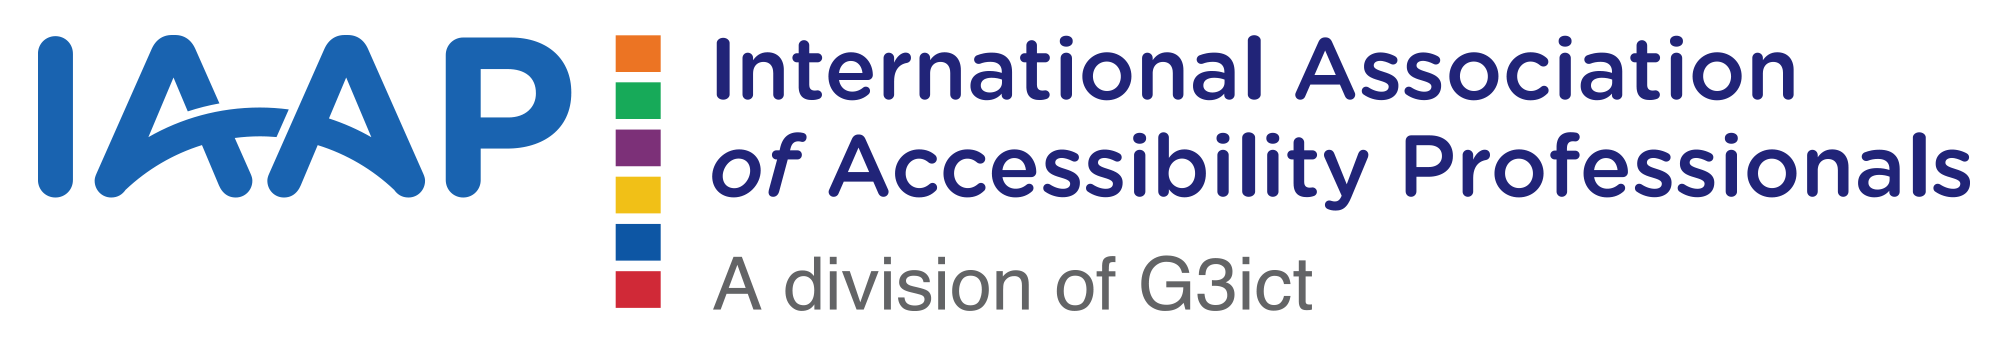 International Association of Accessibility Professionals logo, return to homepage 